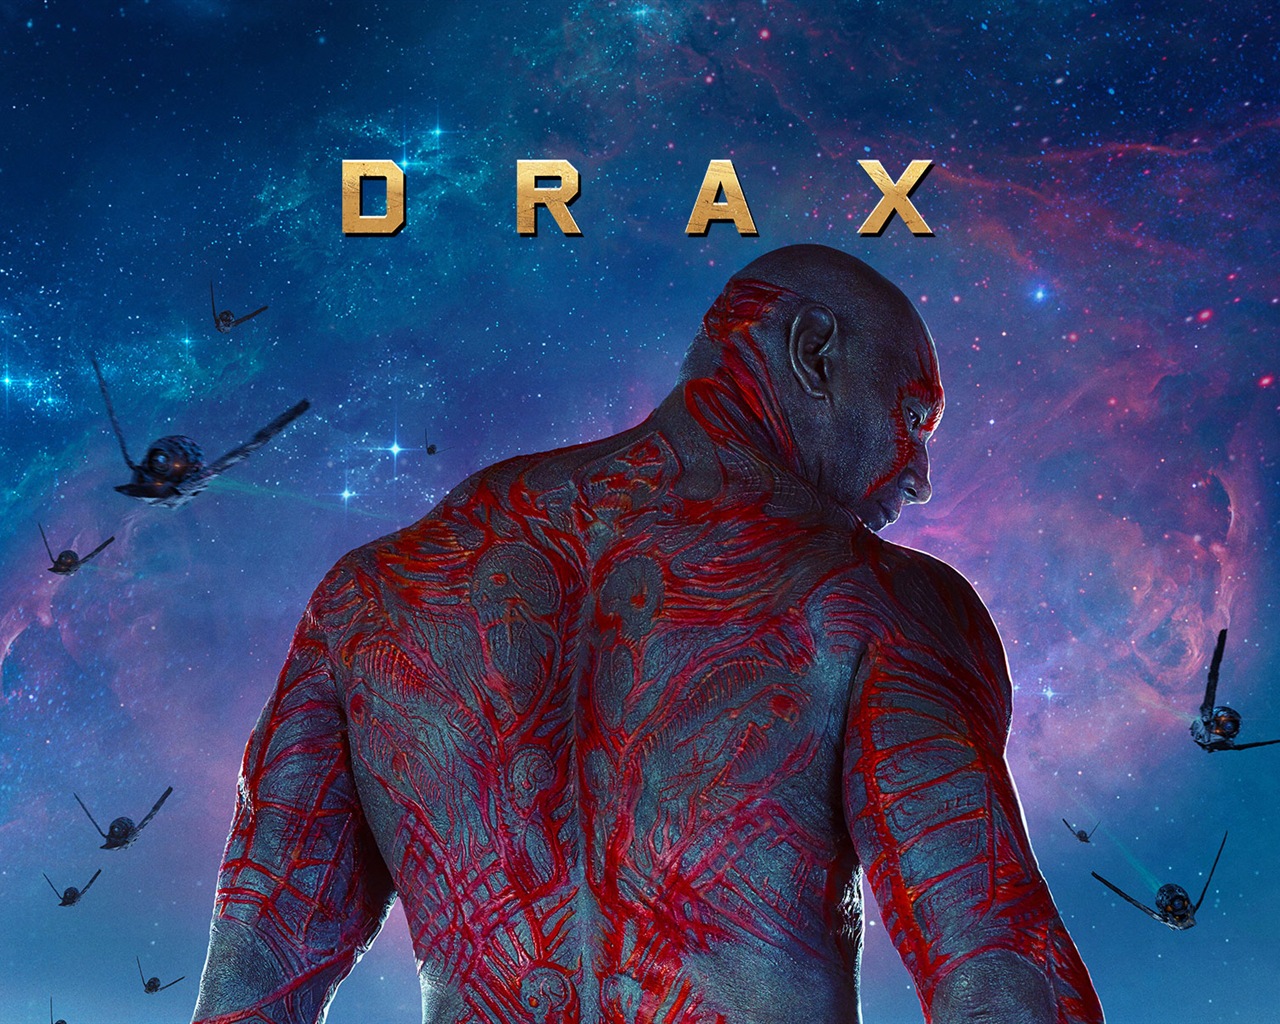 Guardians of the Galaxy 2014 HD movie wallpapers #6 - 1280x1024